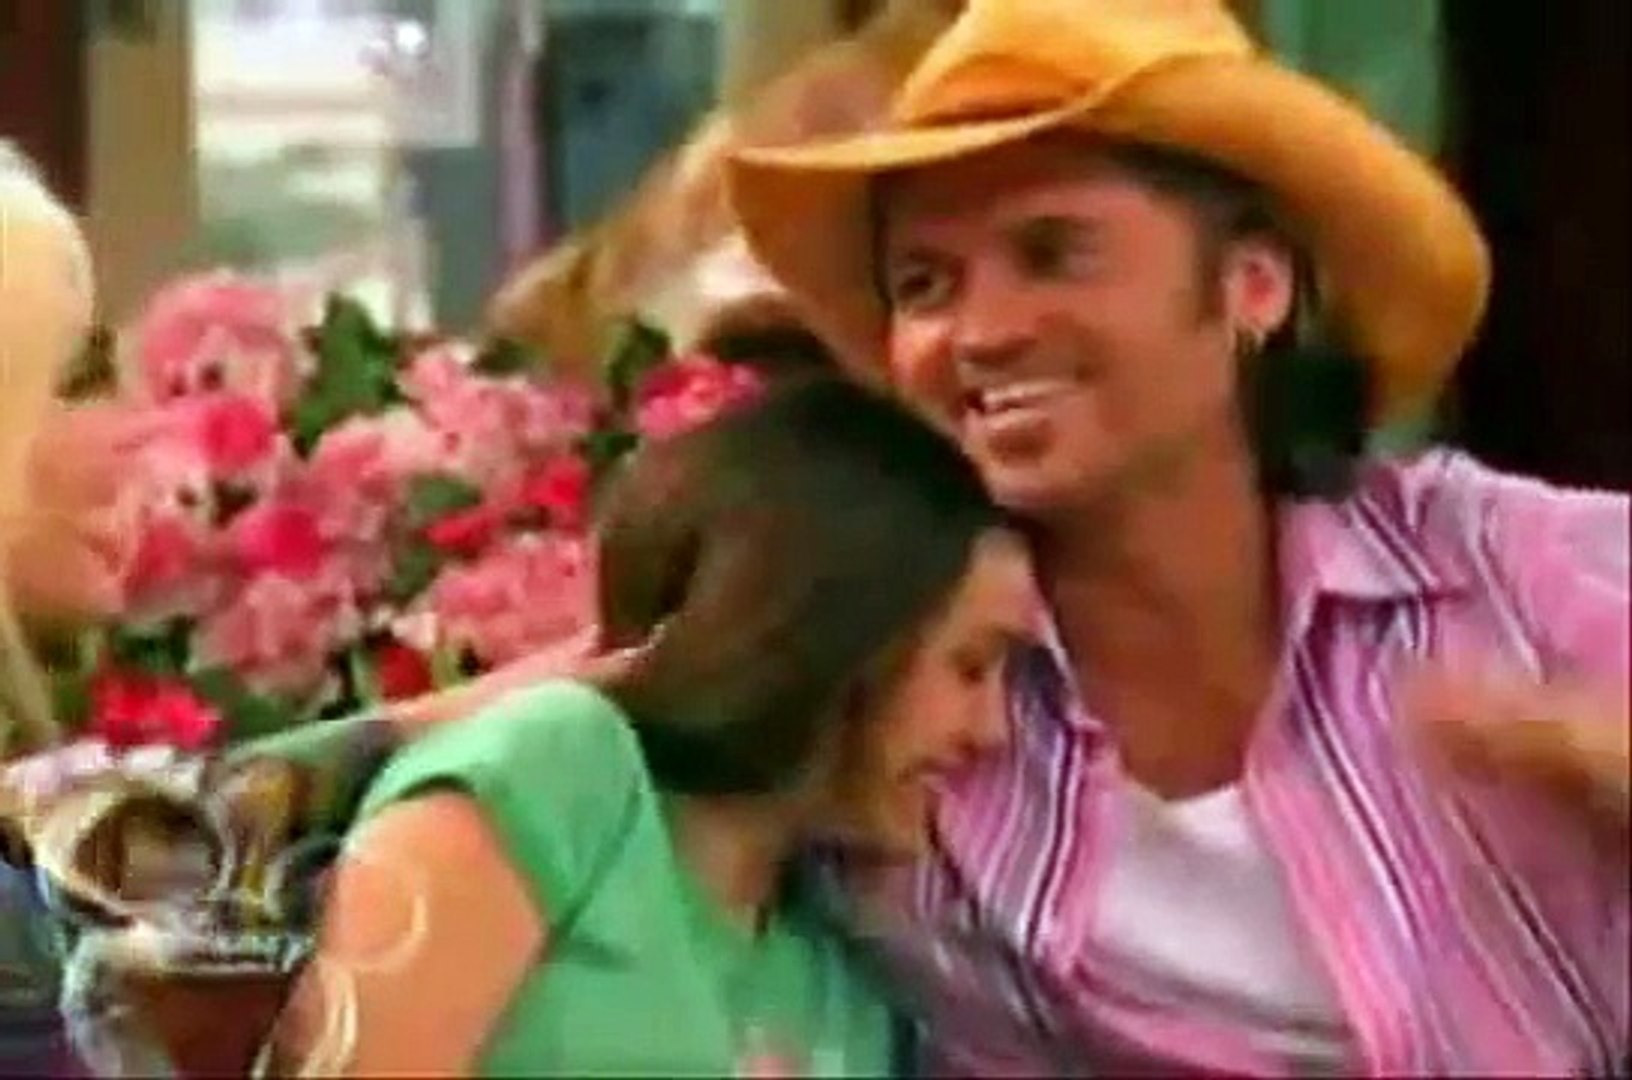 My Little Girl - Billy Ray Cyrus and Miley Cyrus